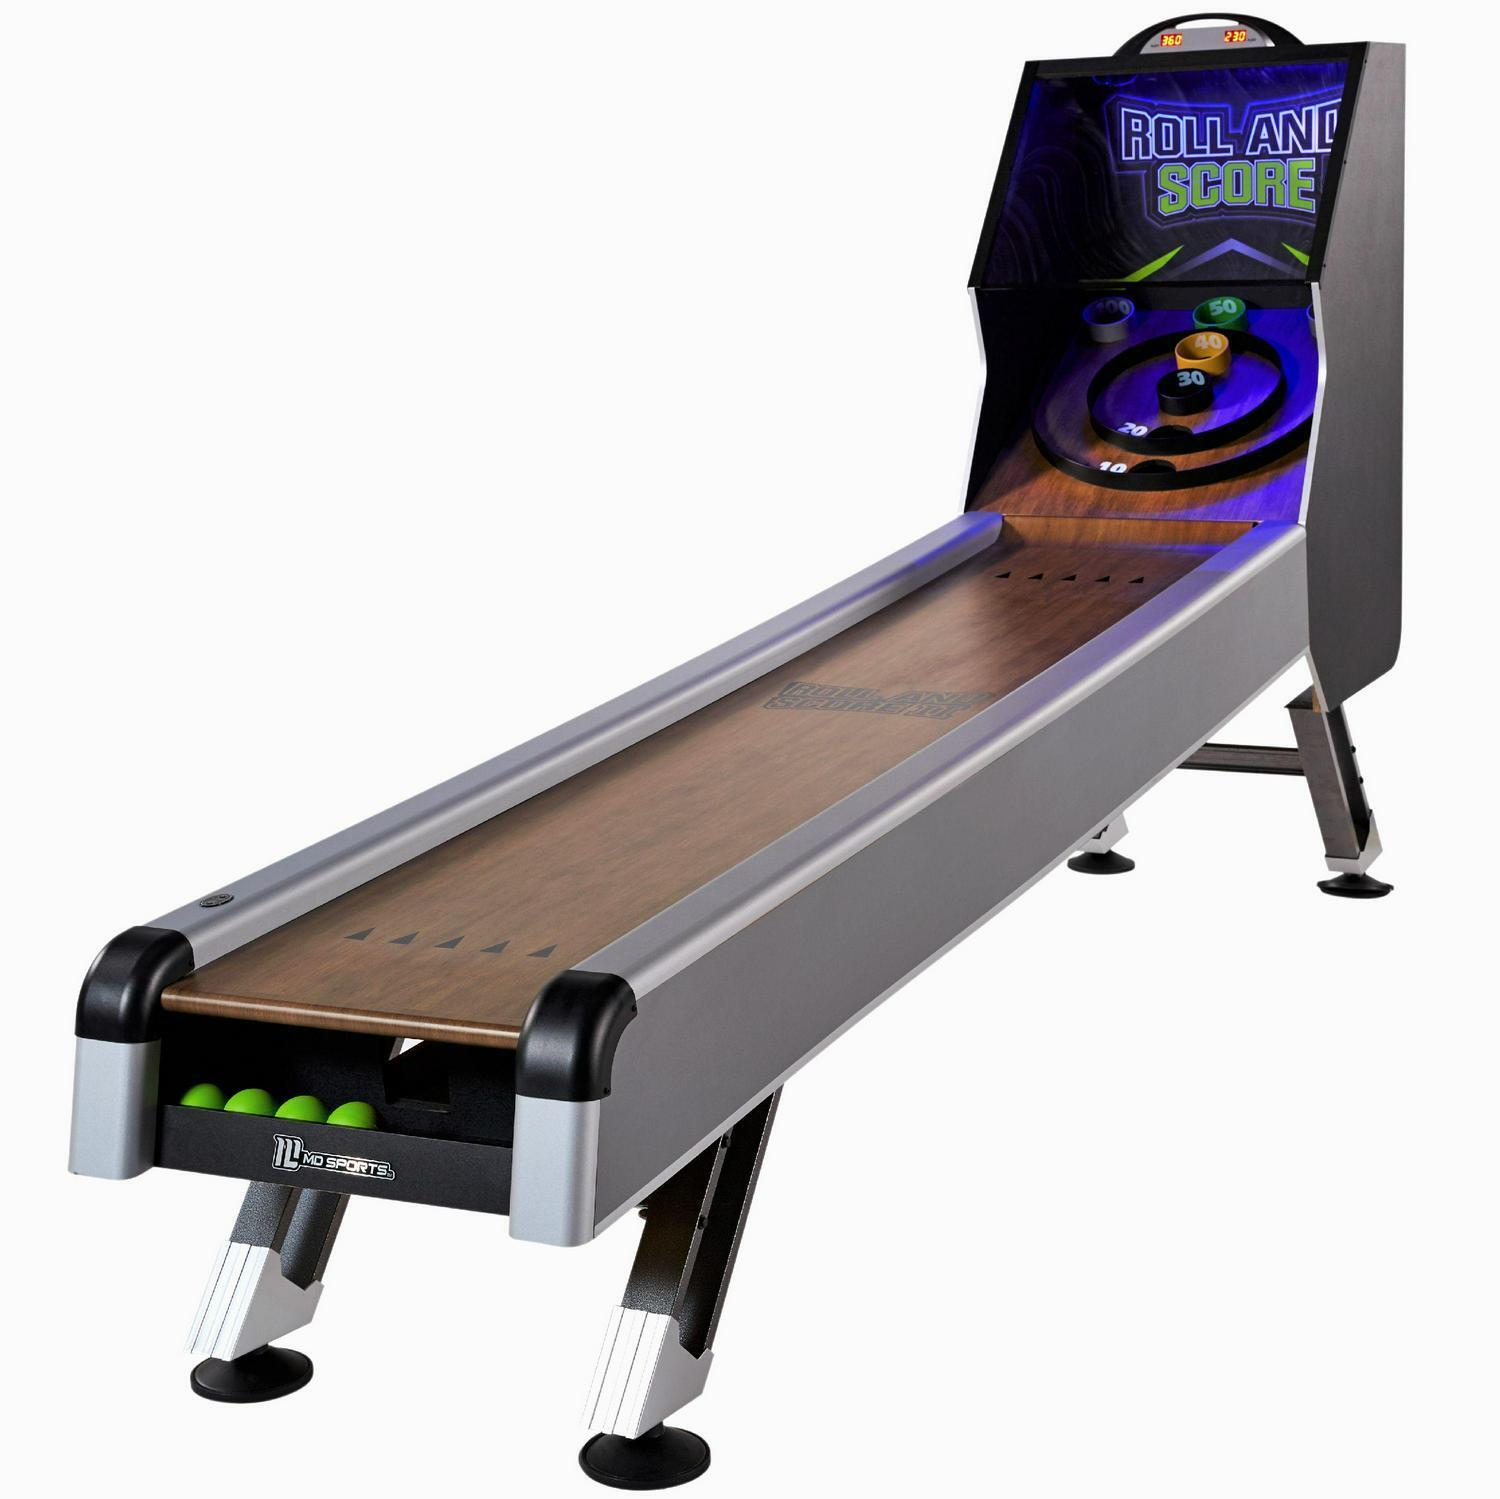 10' Roll And Score Table With Steel Legs, Led Scorer, Arcade Sound Effects